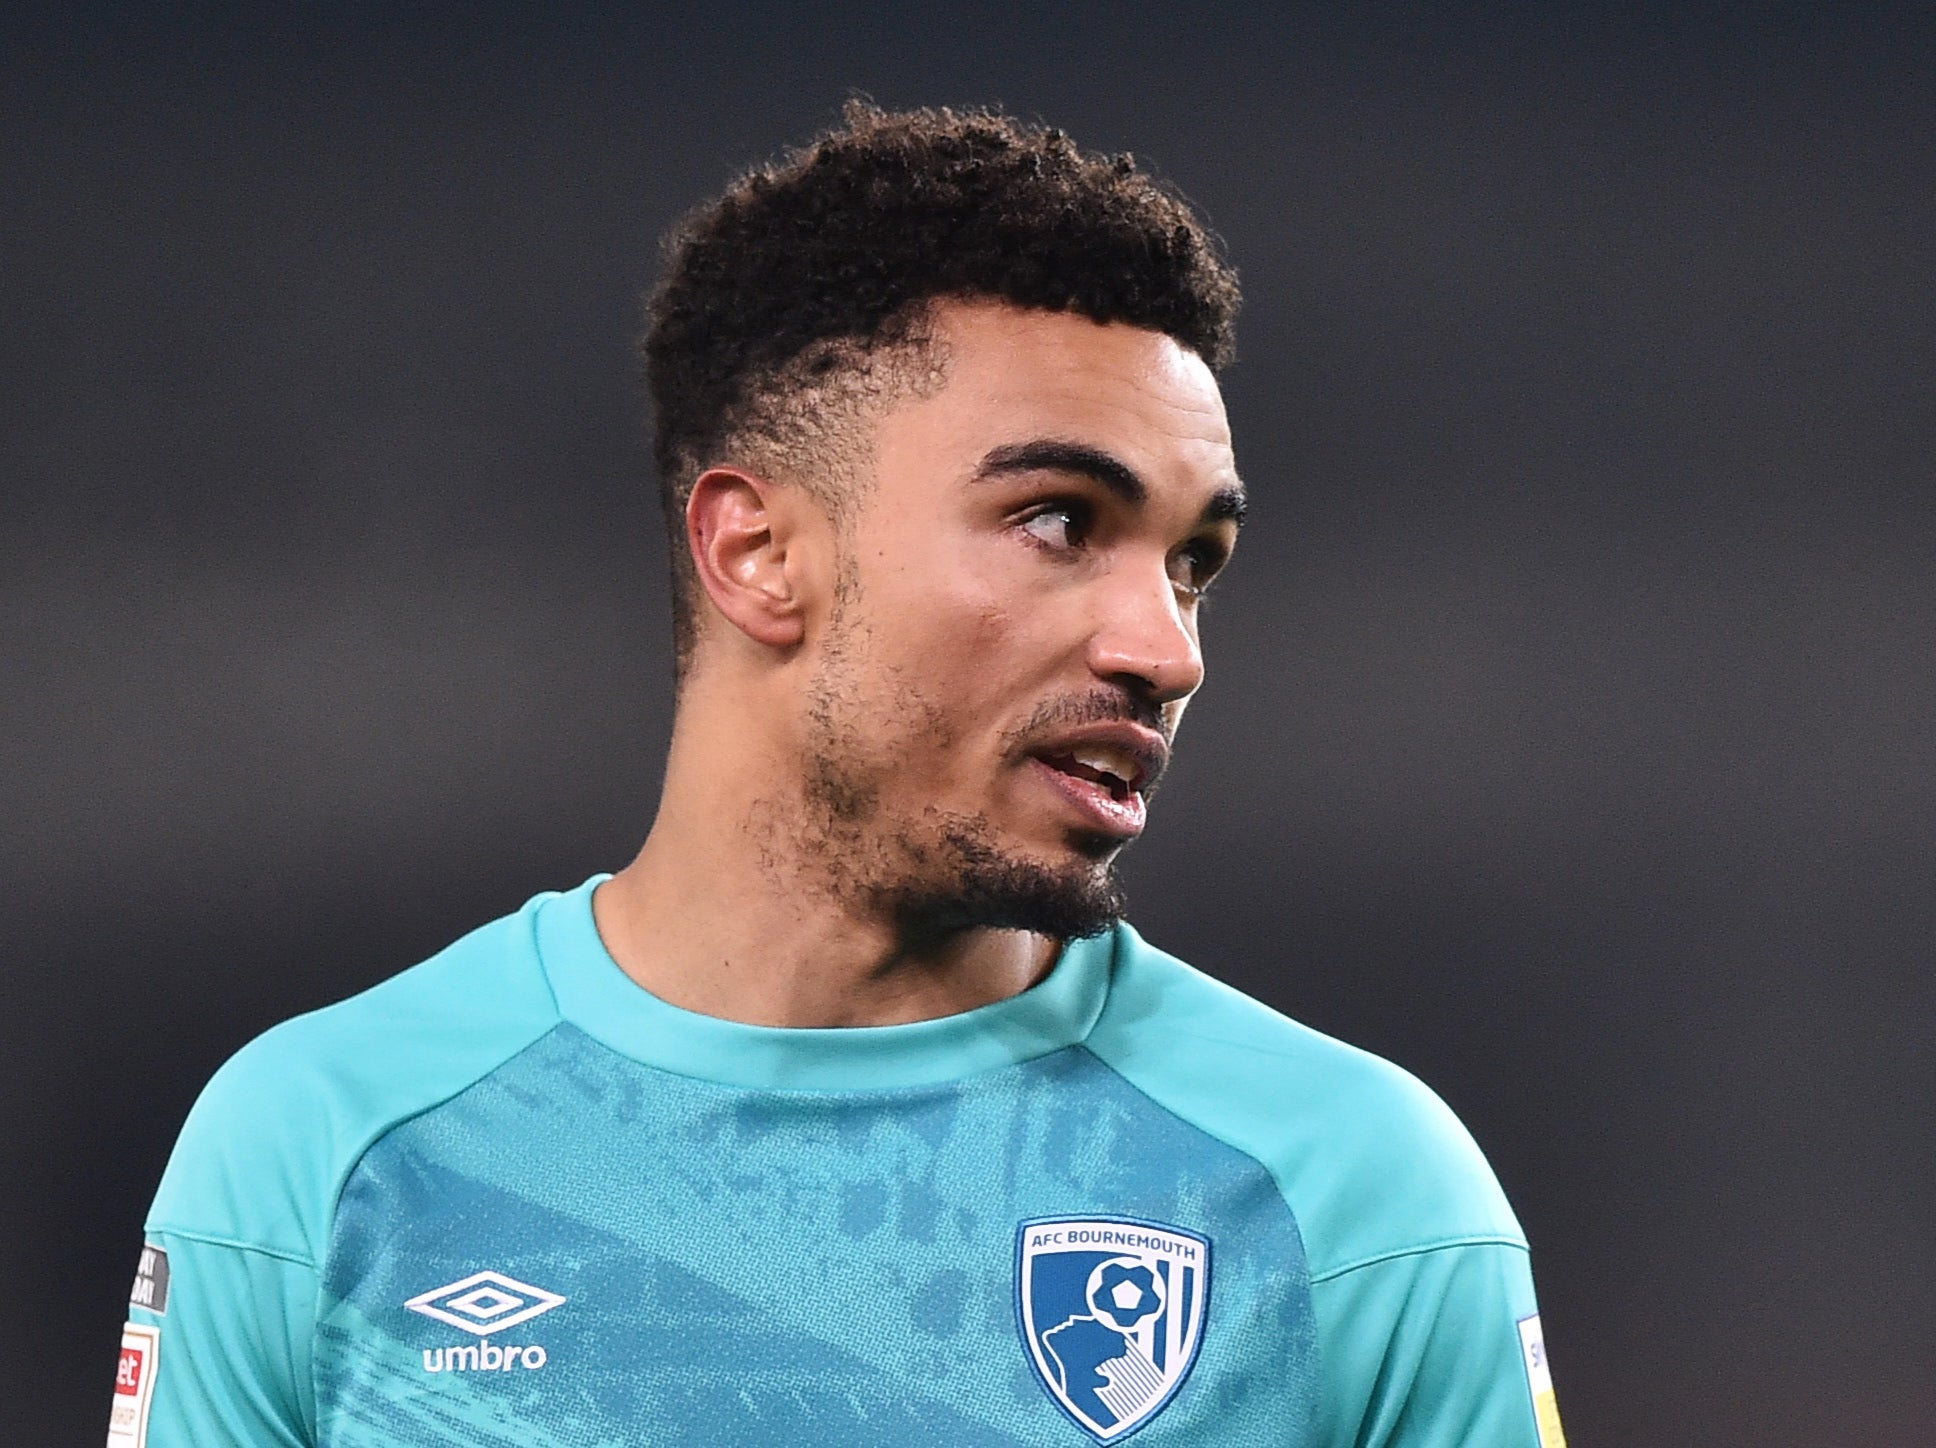 Junior Stanislas: Bournemouth condemn ‘disgusting and intolerable’ racist abuse aimed at winger